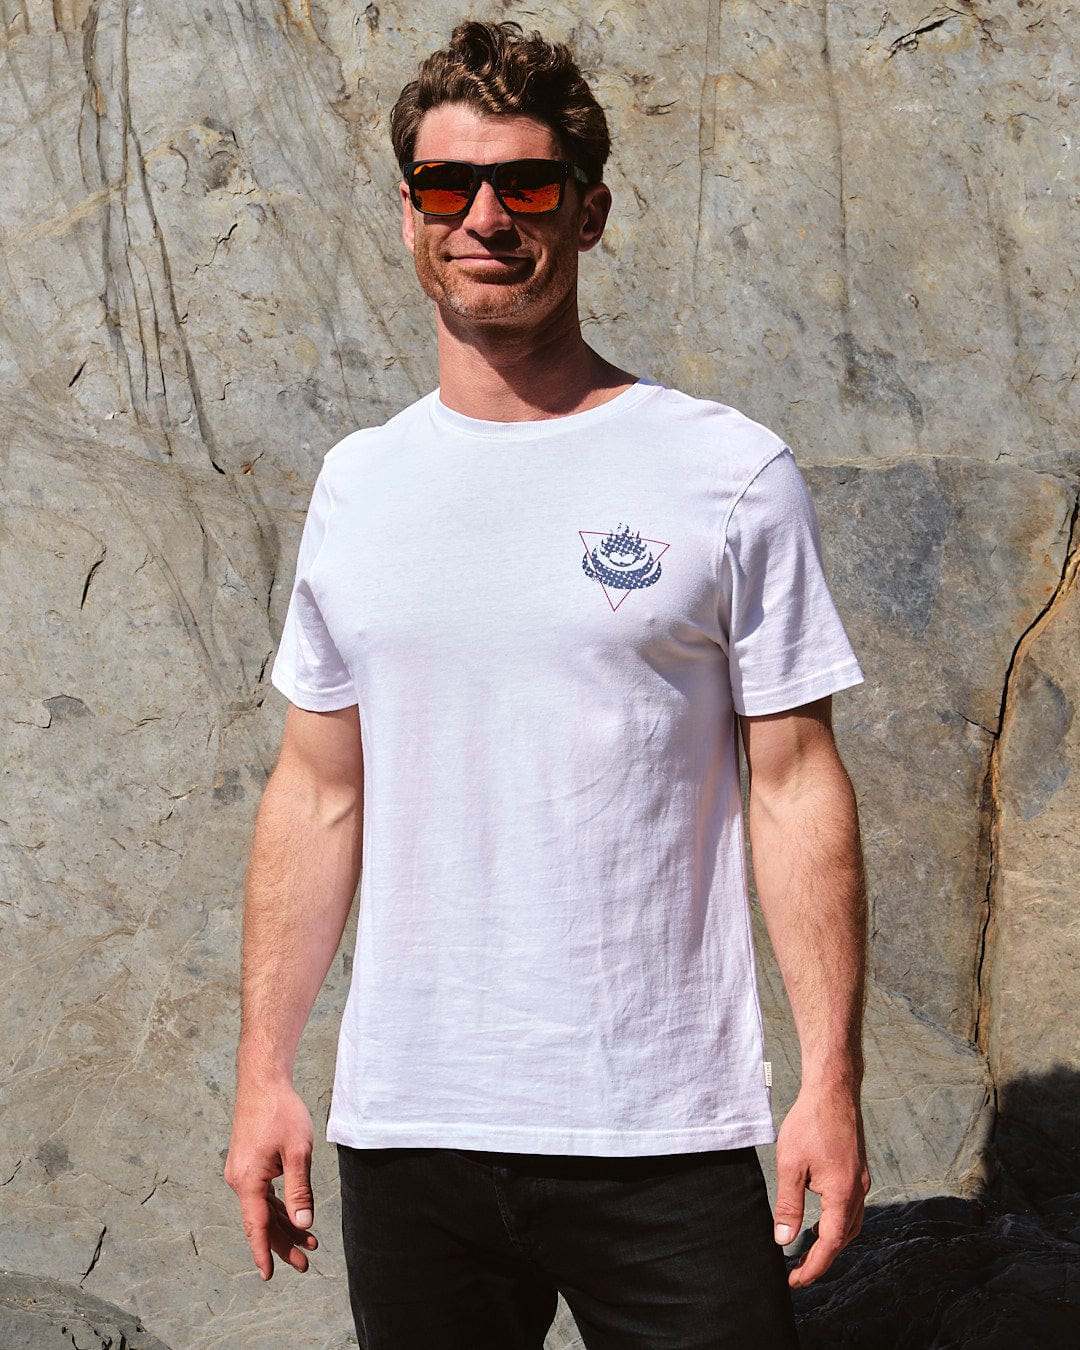 A man wearing sunglasses and a Saltrock Poolside Wave - Mens Short Sleeve T-Shirt - White standing in front of a rock.